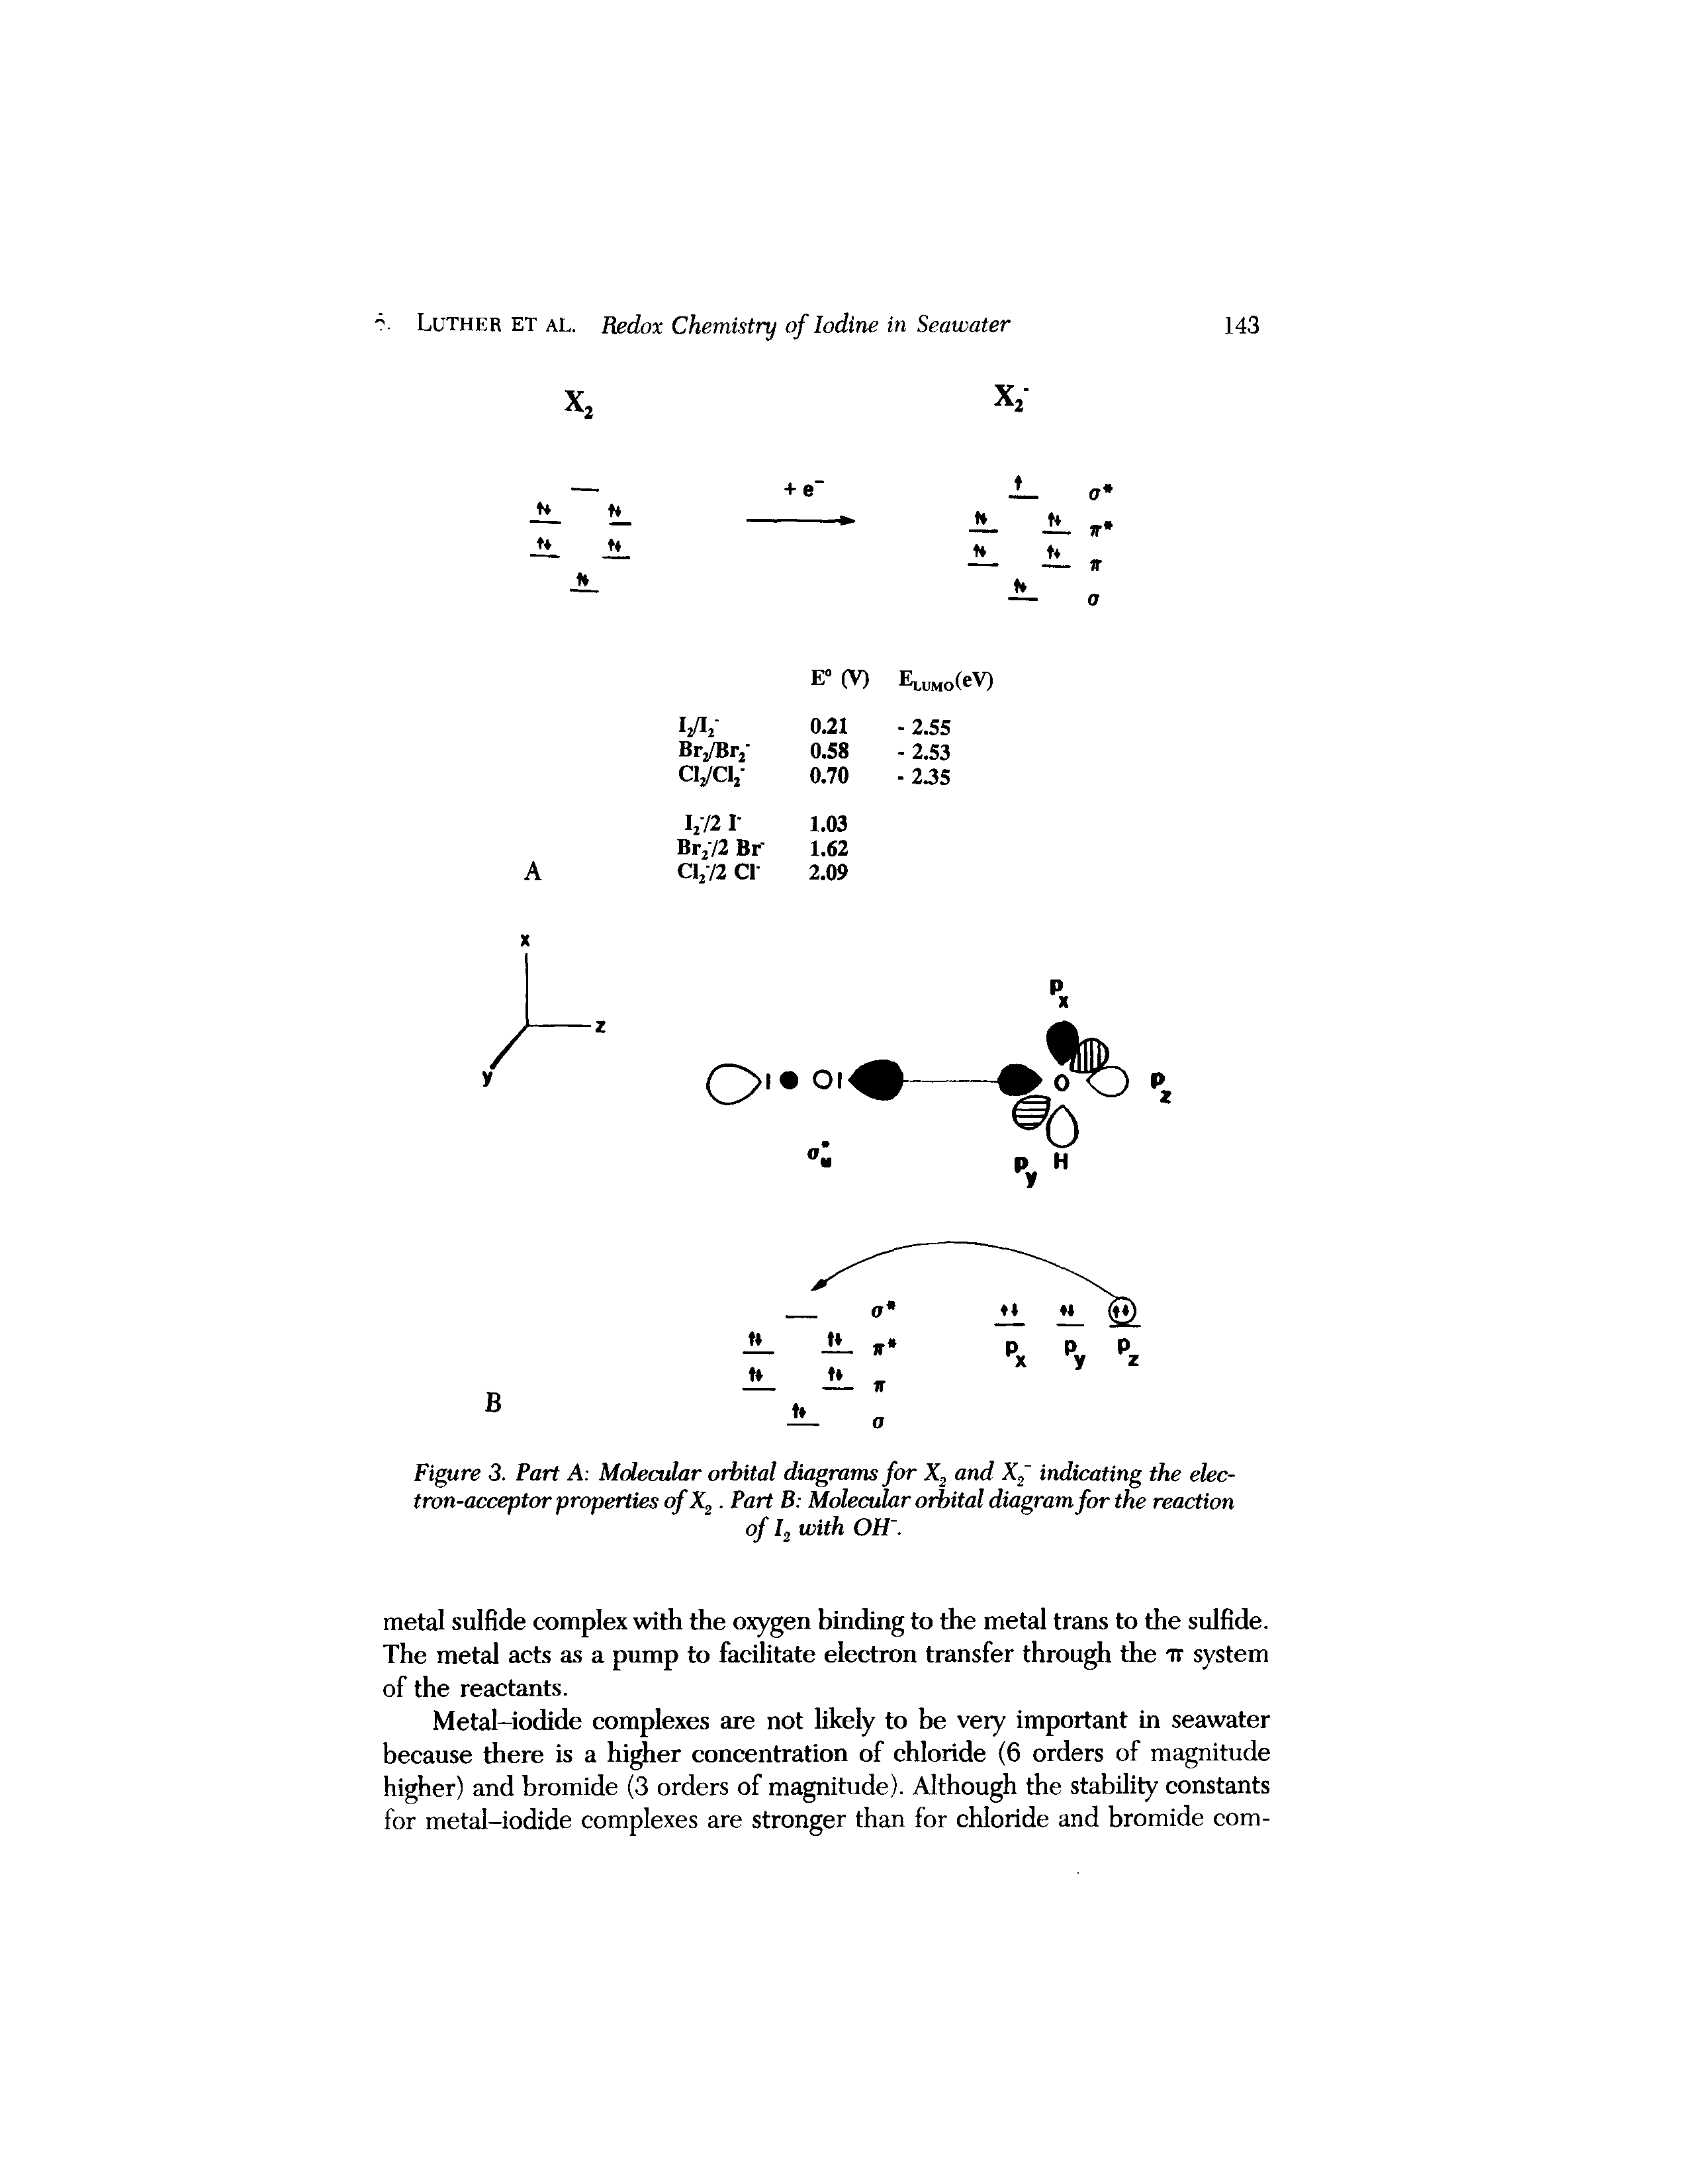 Figure 3. Part A Molecular orbital diagrams for X2 and X2 indicating the electron-acceptor properties of X2. Part B Molecular orbital diagram for the reaction...